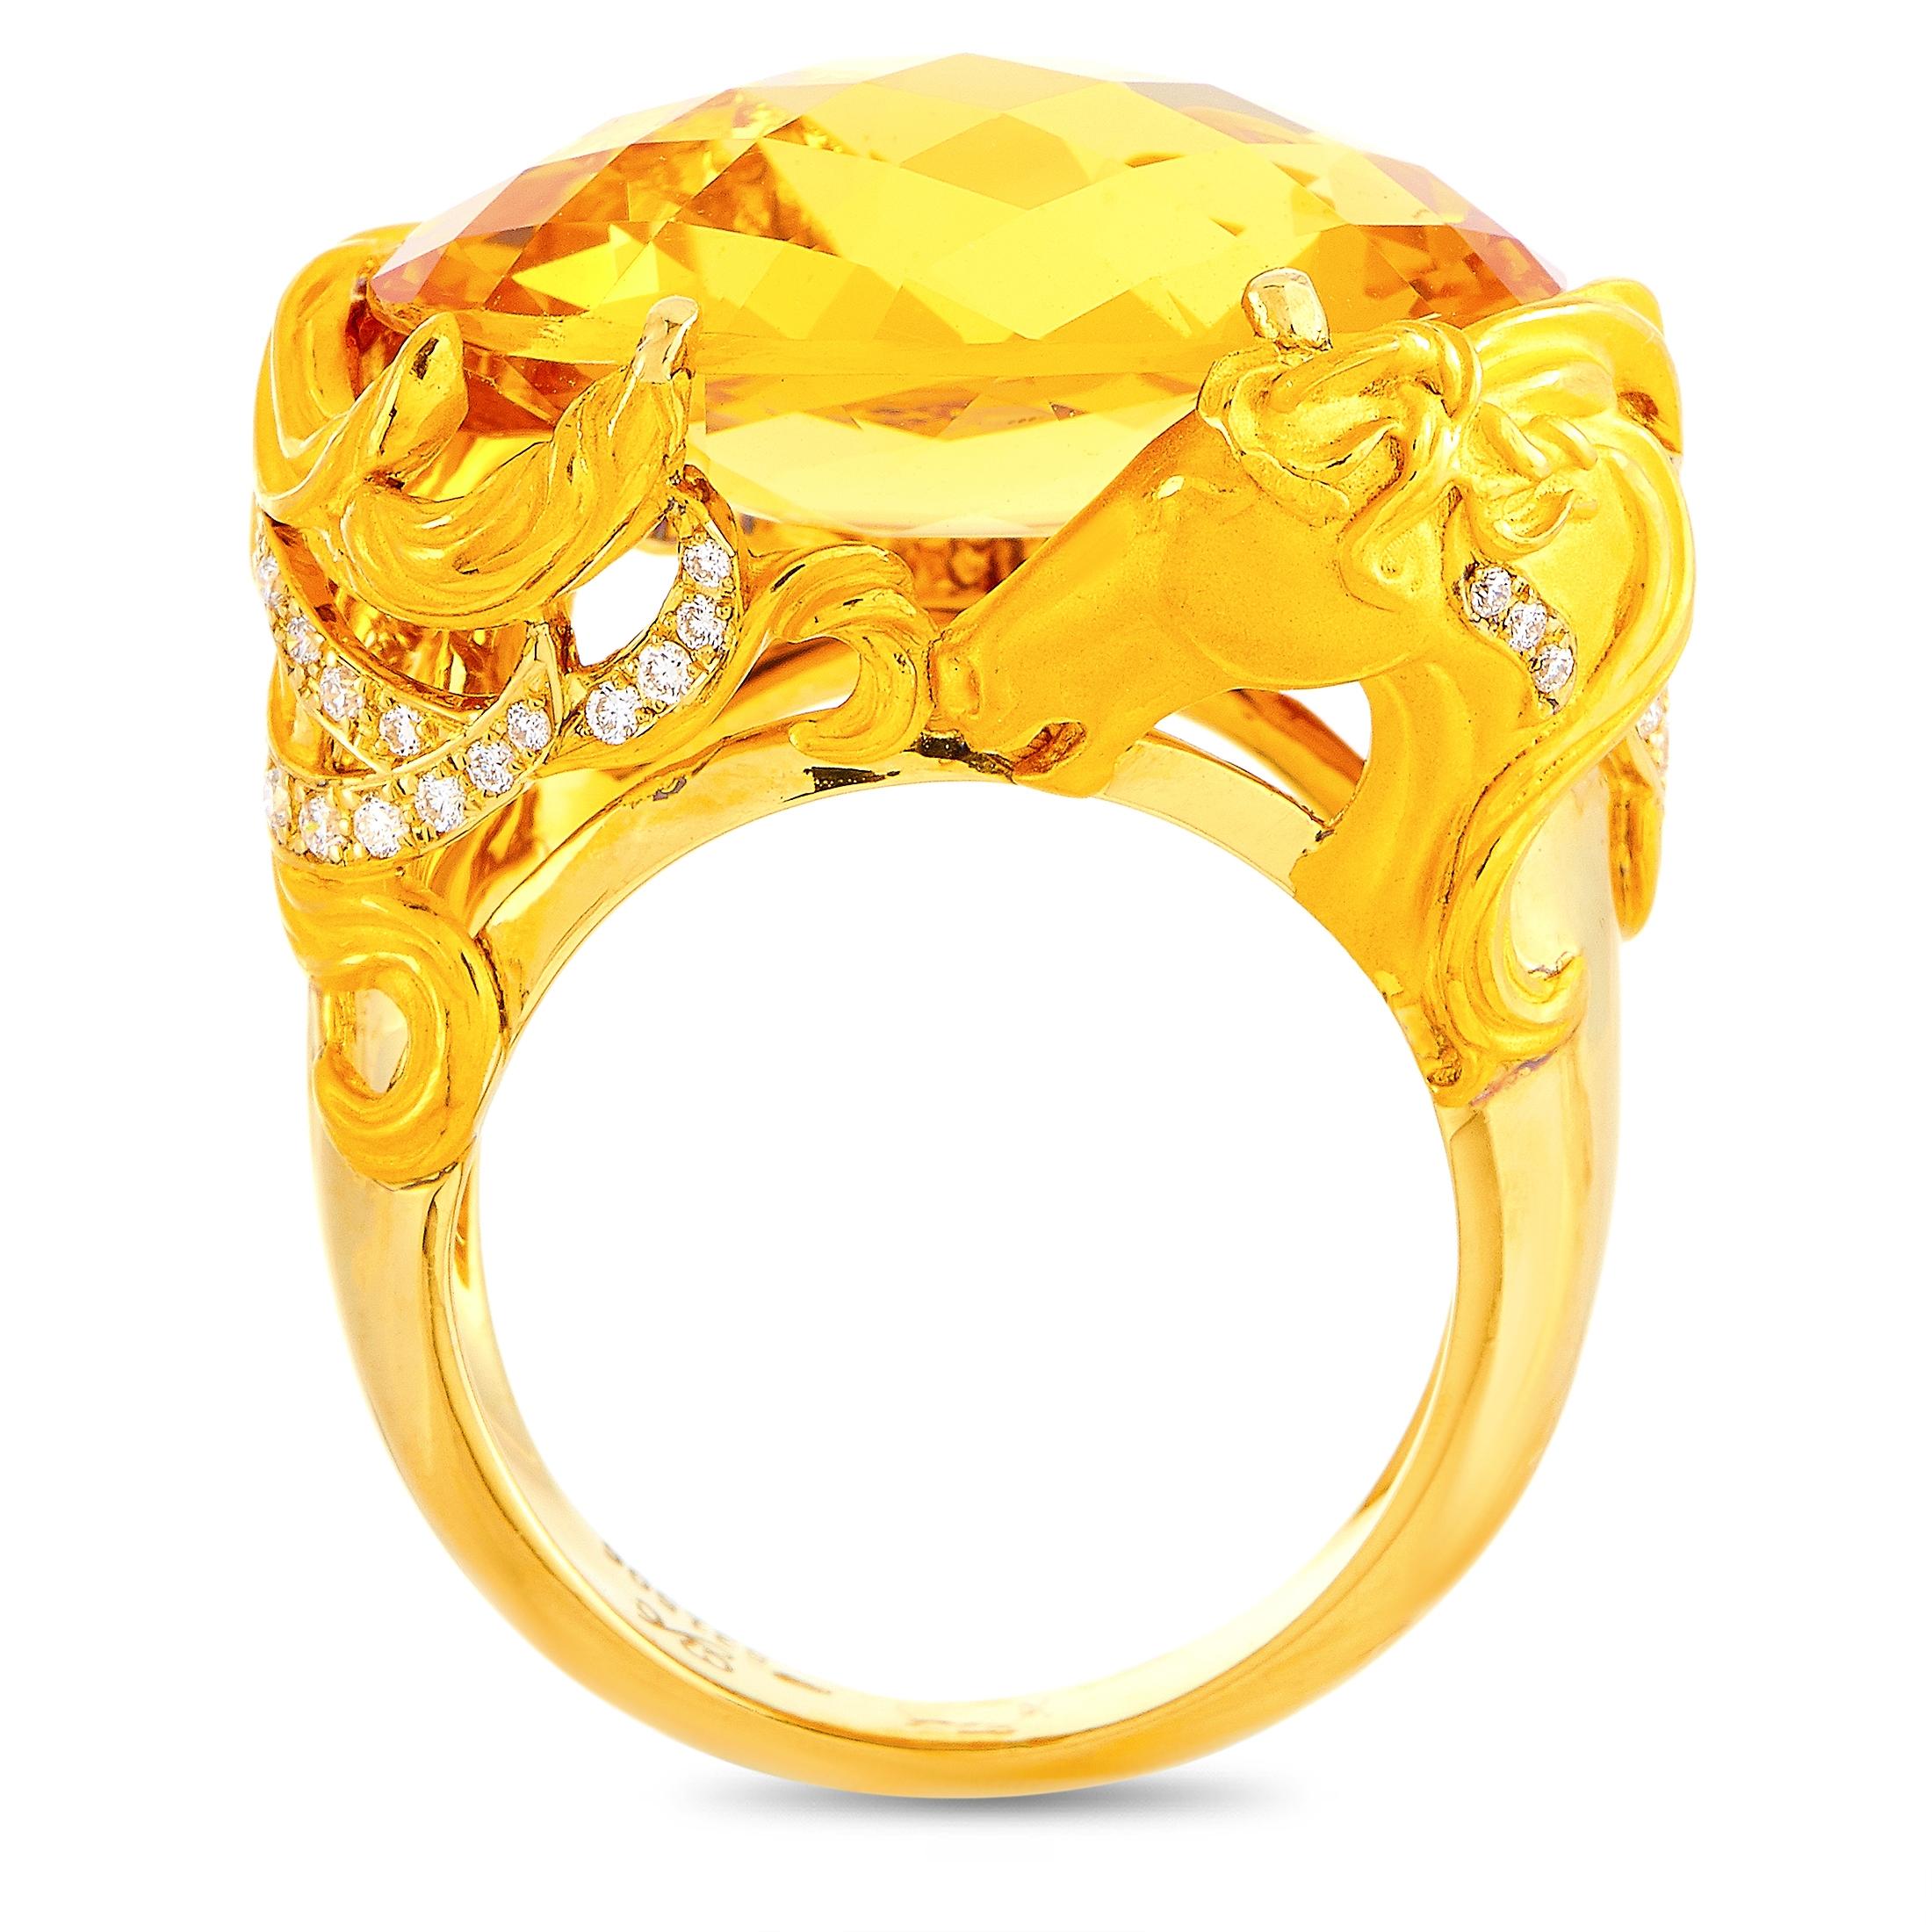 The Carrera y Carrera “Ecuestre” ring is crafted from 18K yellow gold and weighs 12.8 grams, boasting band thickness of 3 mm and top height of 10 mm, while top dimensions measure 15 by 25 mm. The ring is set with an 11.41 ct citrine and a total of